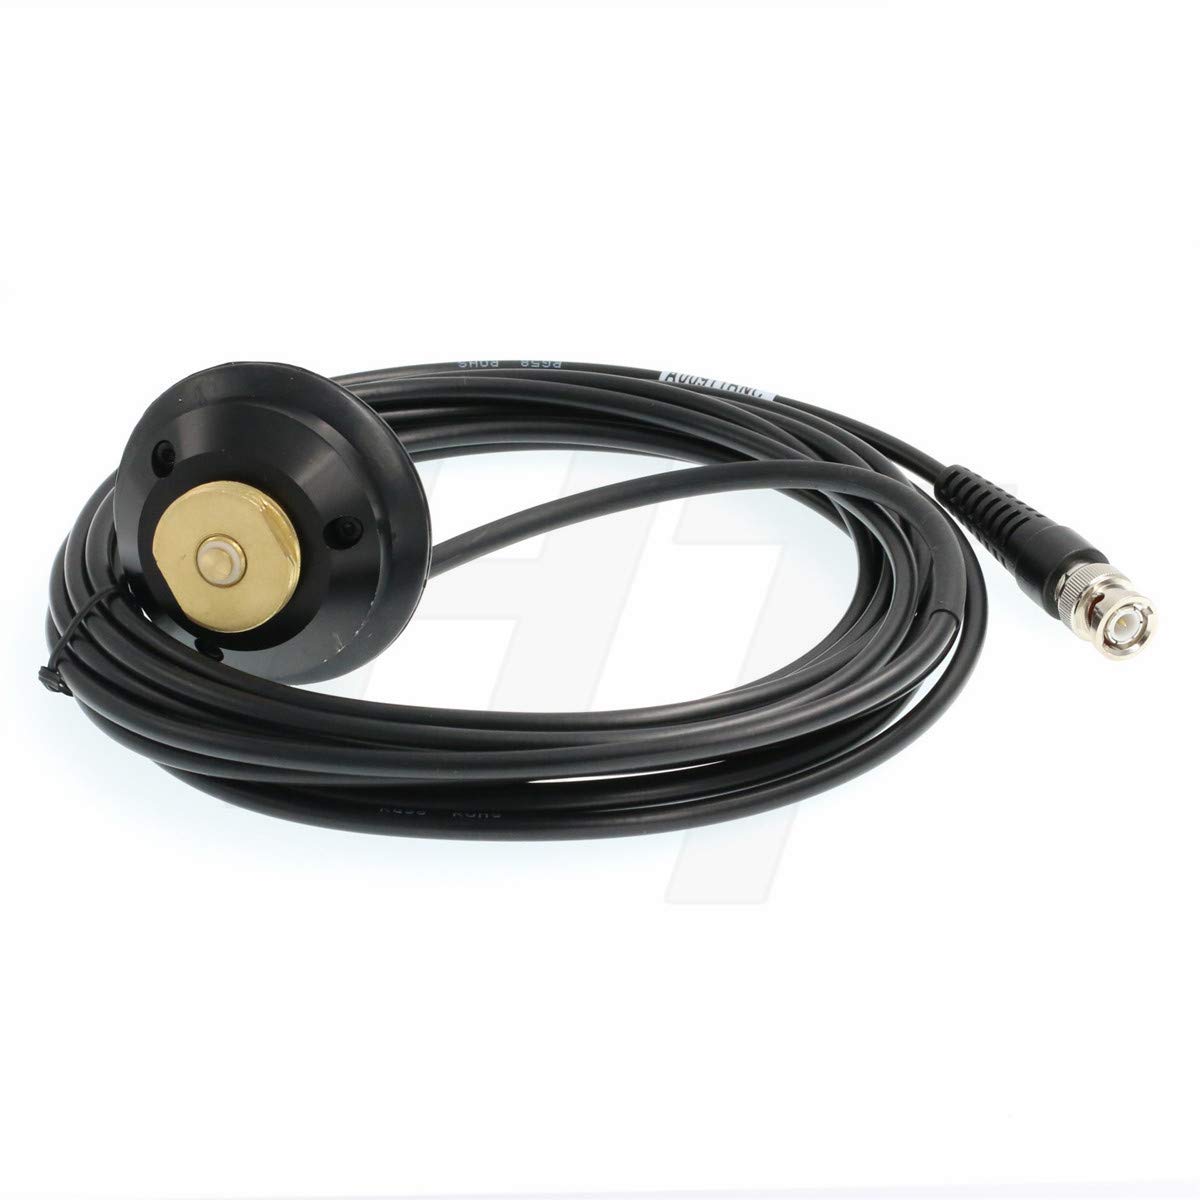 GPS Radio Whip Antenna BNC Connector Pole Mount Cable for Trimble Topcon Leica Radio Base Station Pacific Crest PDL HPB RFM96W (5m, BNC)